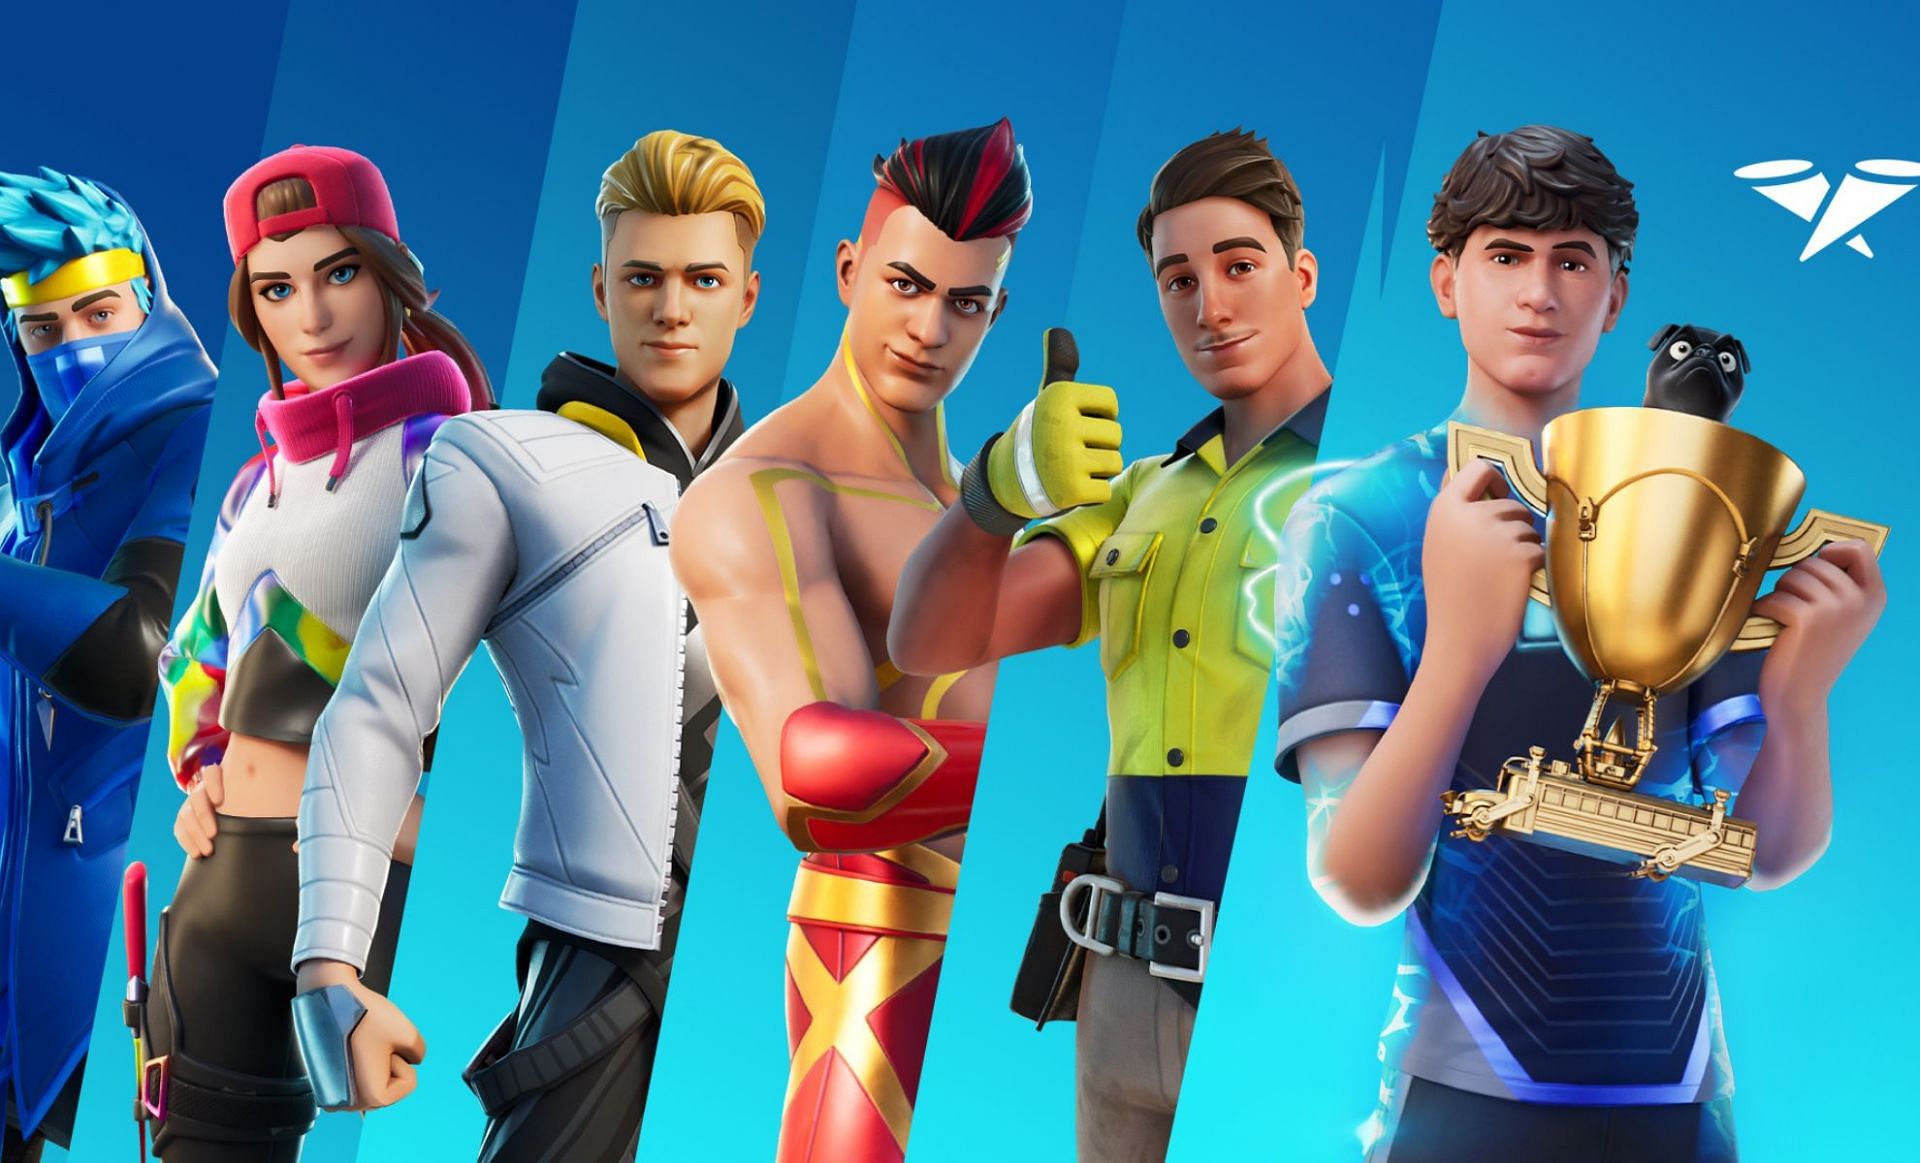 Several Fortnite content creators have their Icon skins, and others could get one as well (Image via Epic Games)